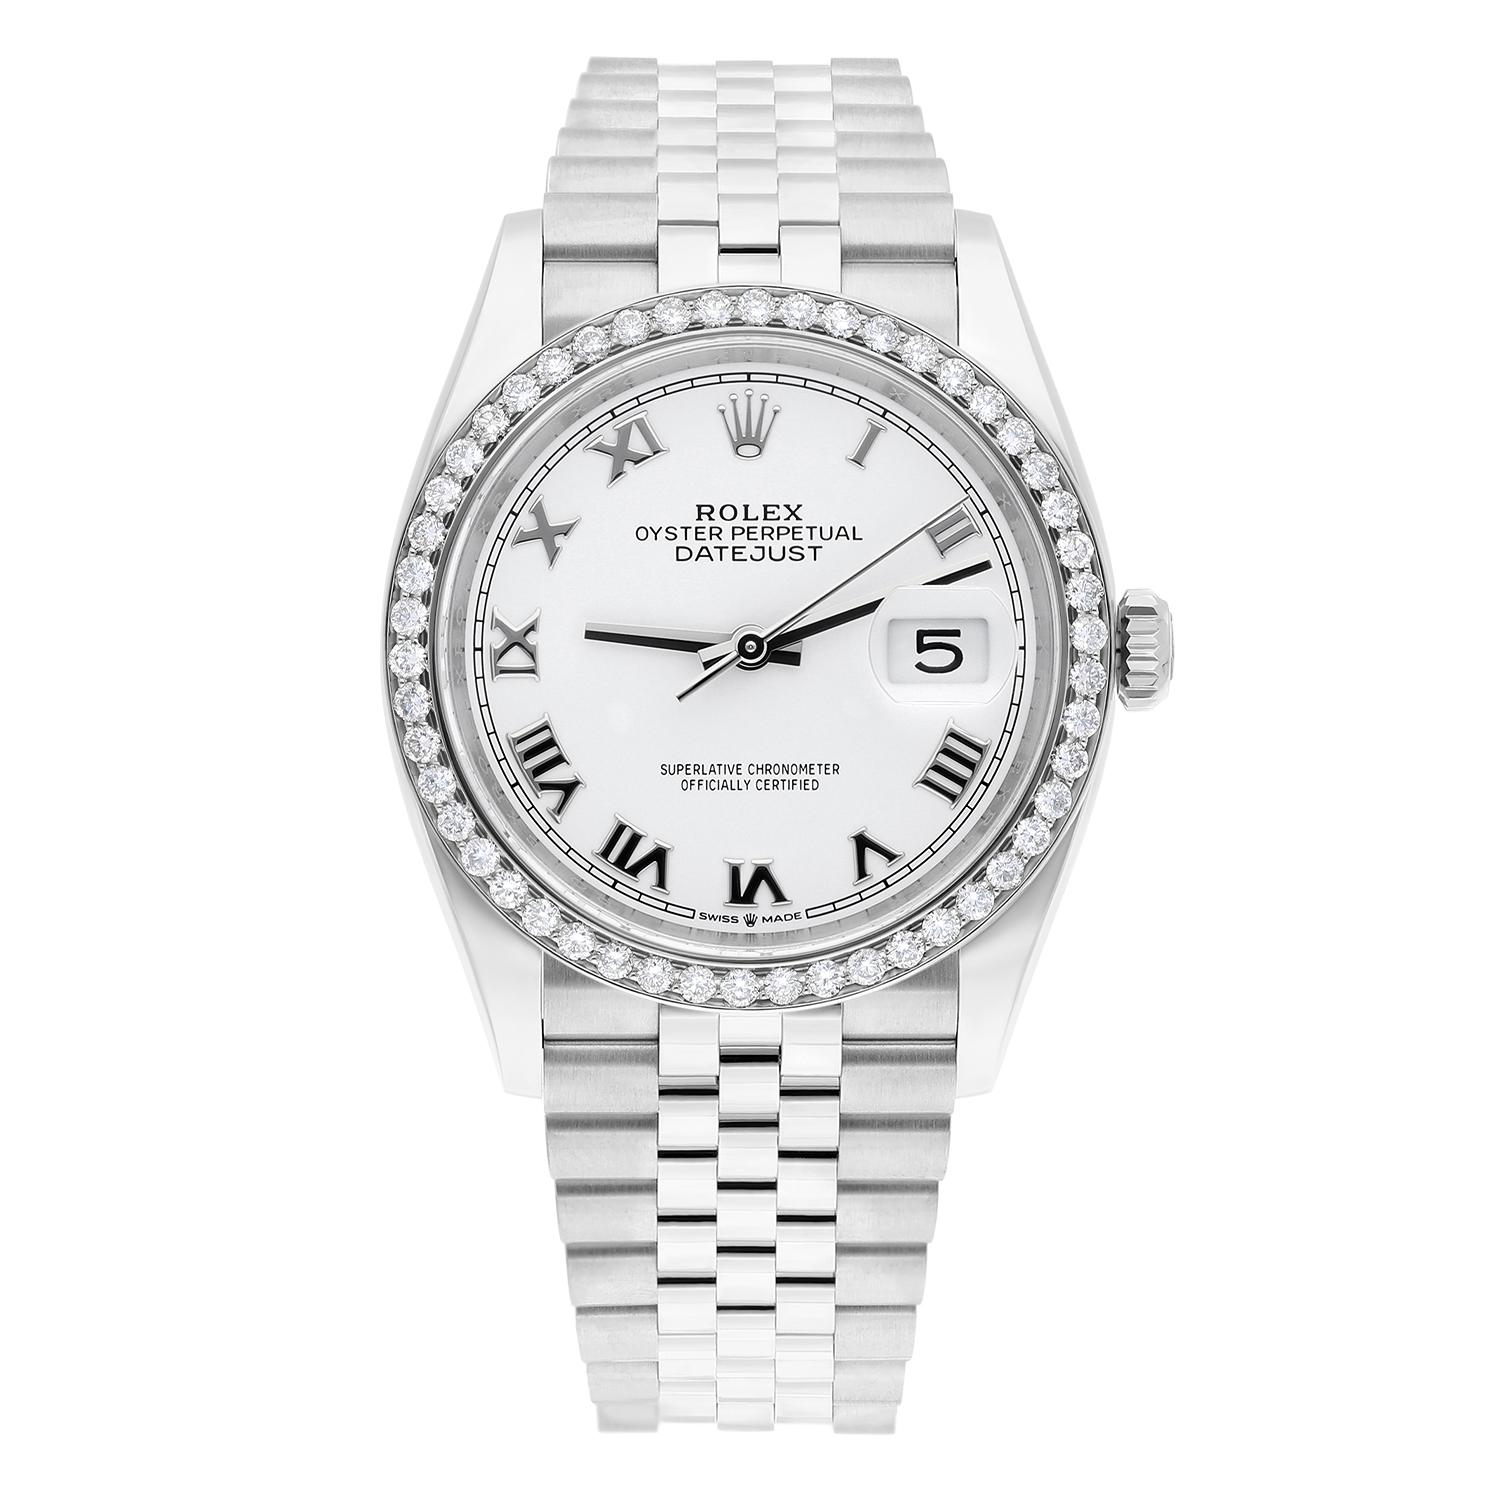 This Rolex Datejust wristwatch is a luxury timepiece with a round, 36mm stainless steel case and a white dial featuring Roman numerals. The watch has a custom added diamond bezel with 100% natural diamonds.The scratch-resistant sapphire crystal and